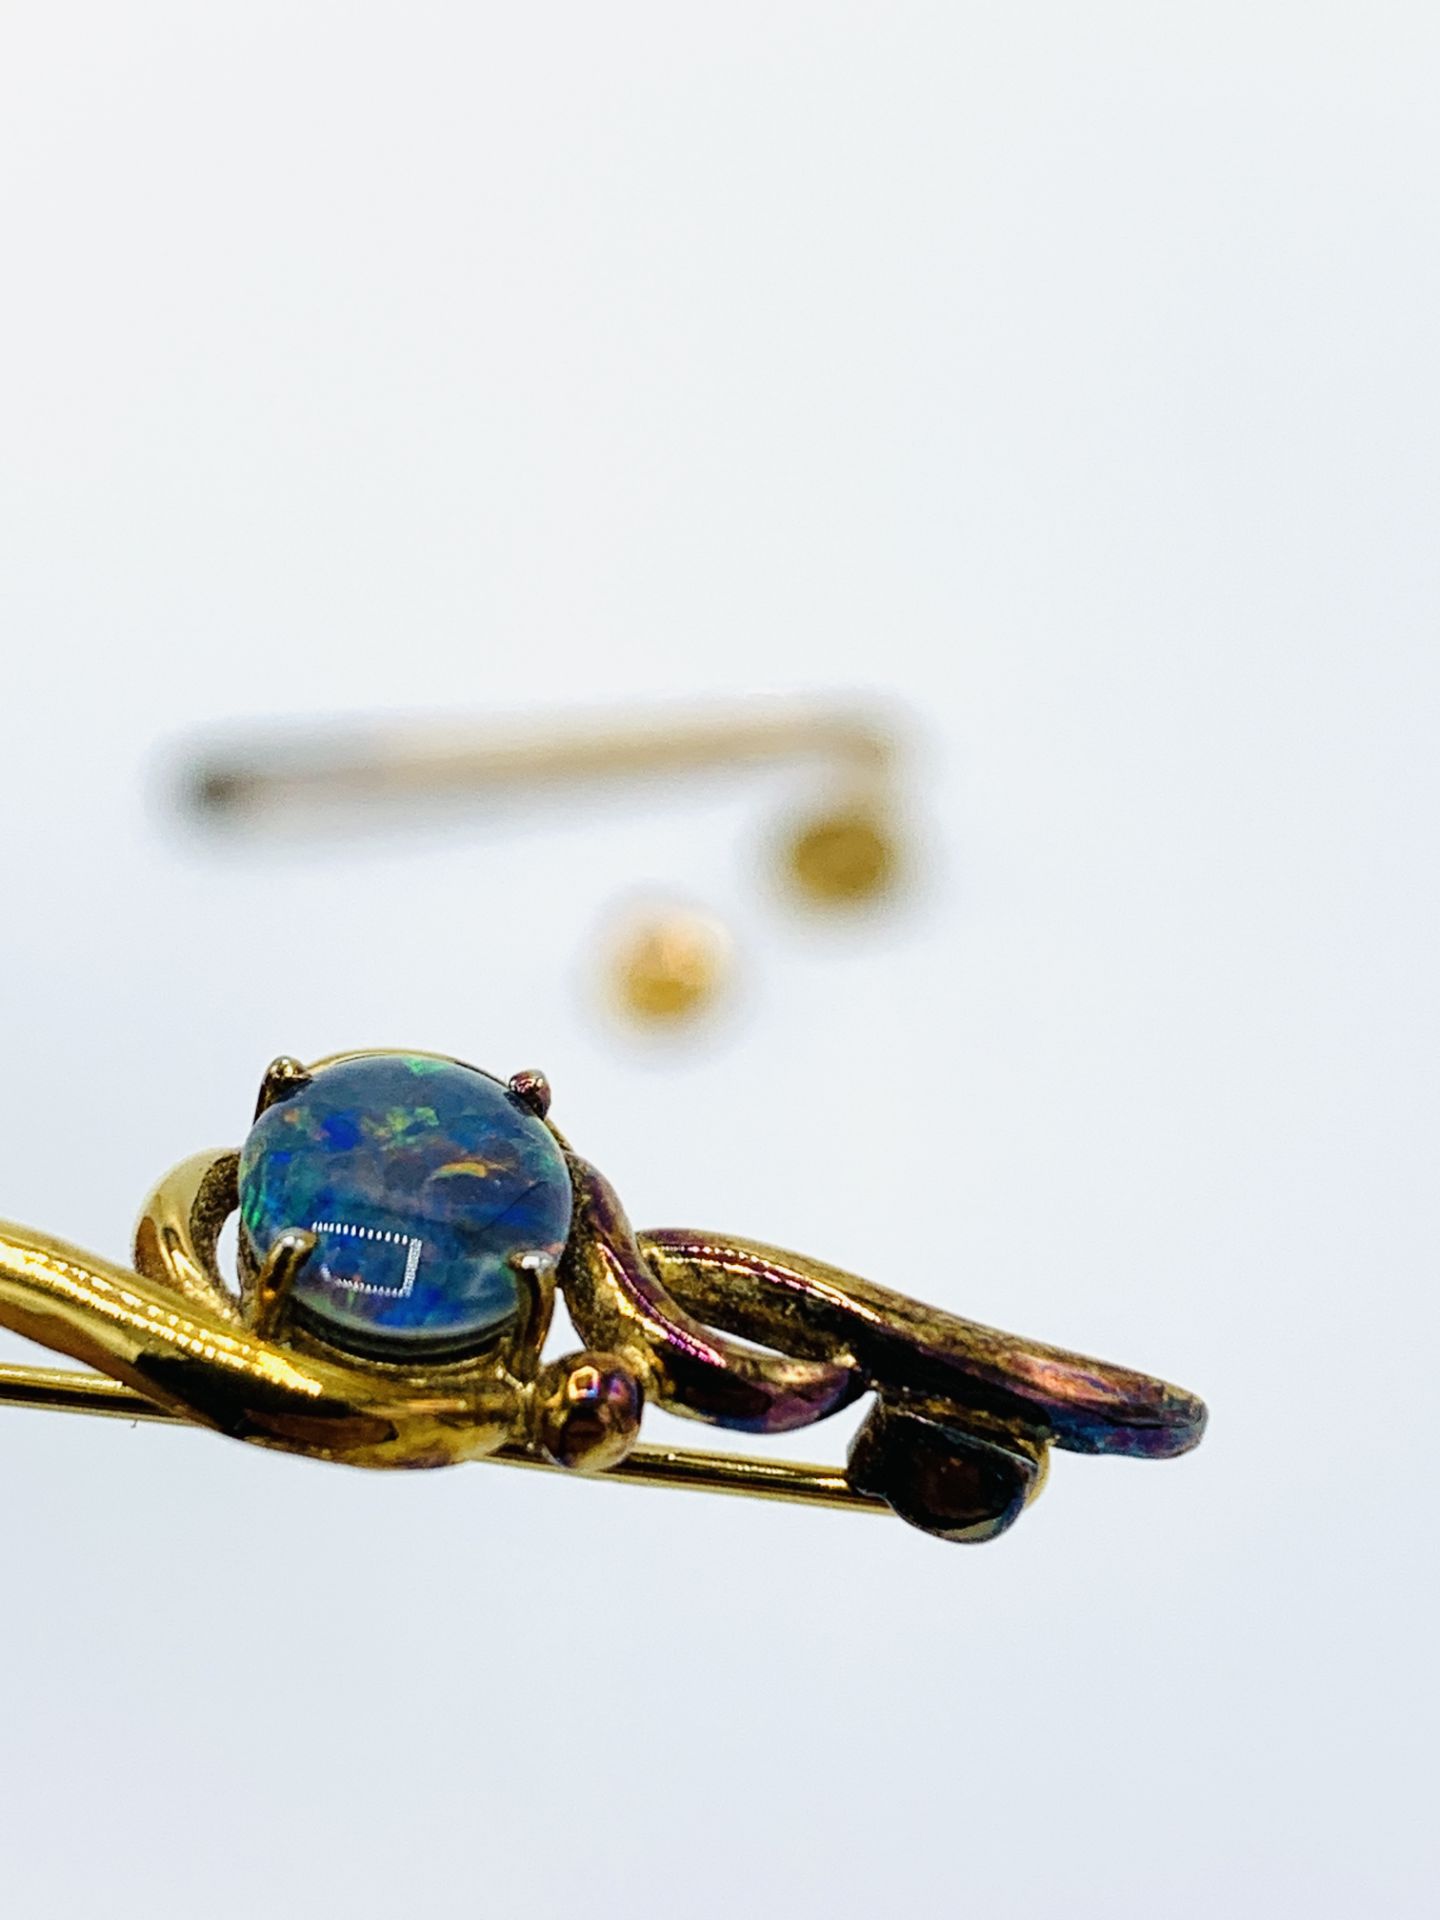 15ct gold stock pin, a 9ct gold stud and an opal doublet set brooch - Image 3 of 3